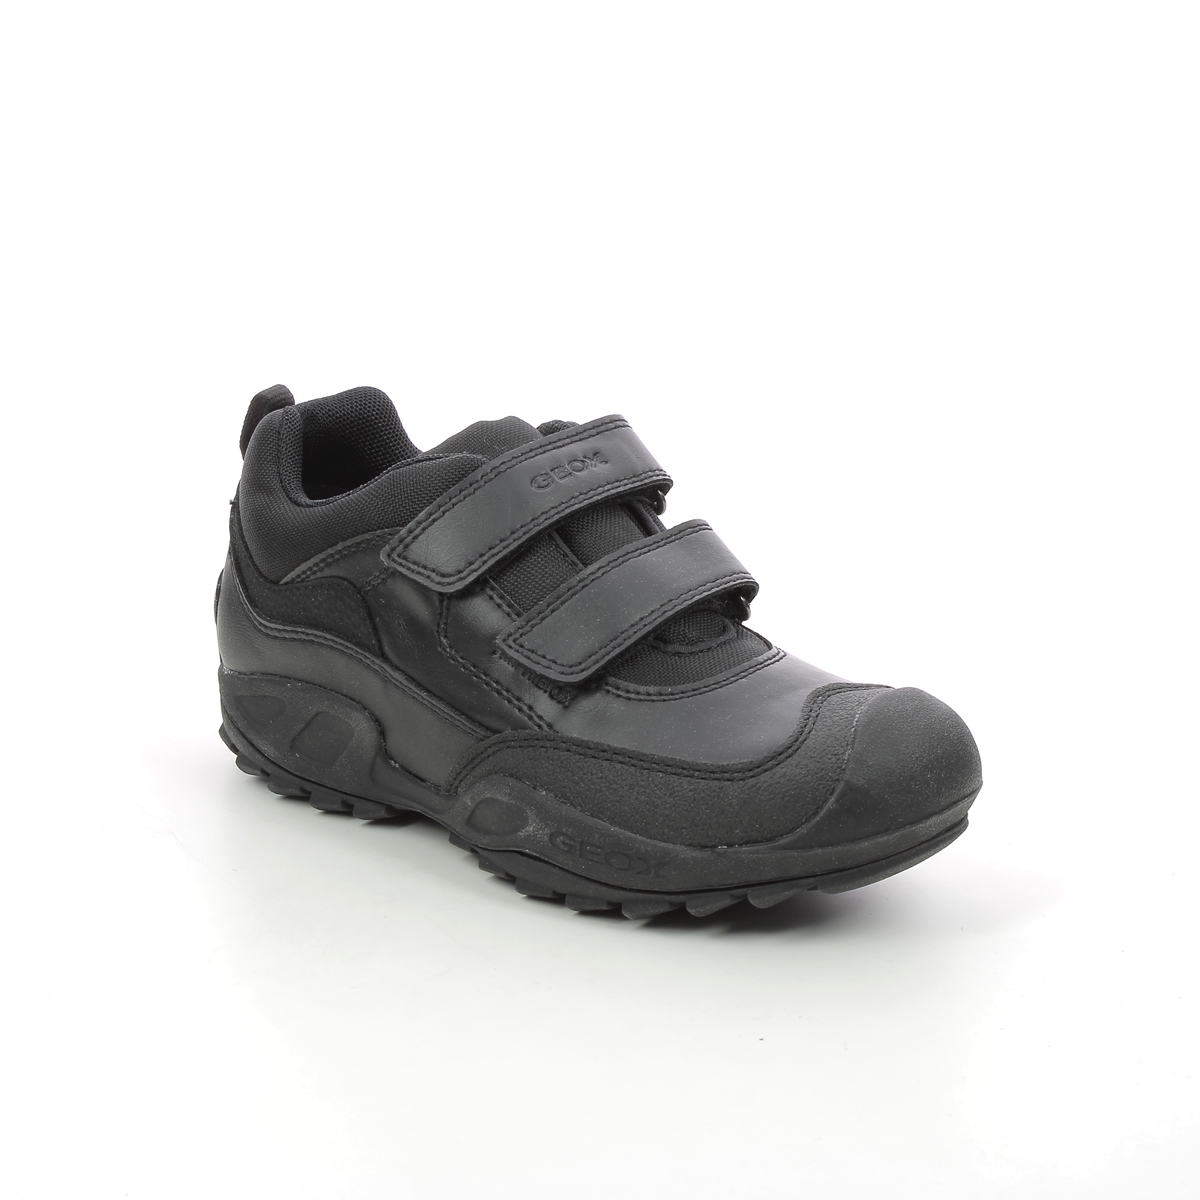 Geox New Savage Tex Black Kids Boys Shoes J841WB-C9999 in a Plain Man-made in Size 29